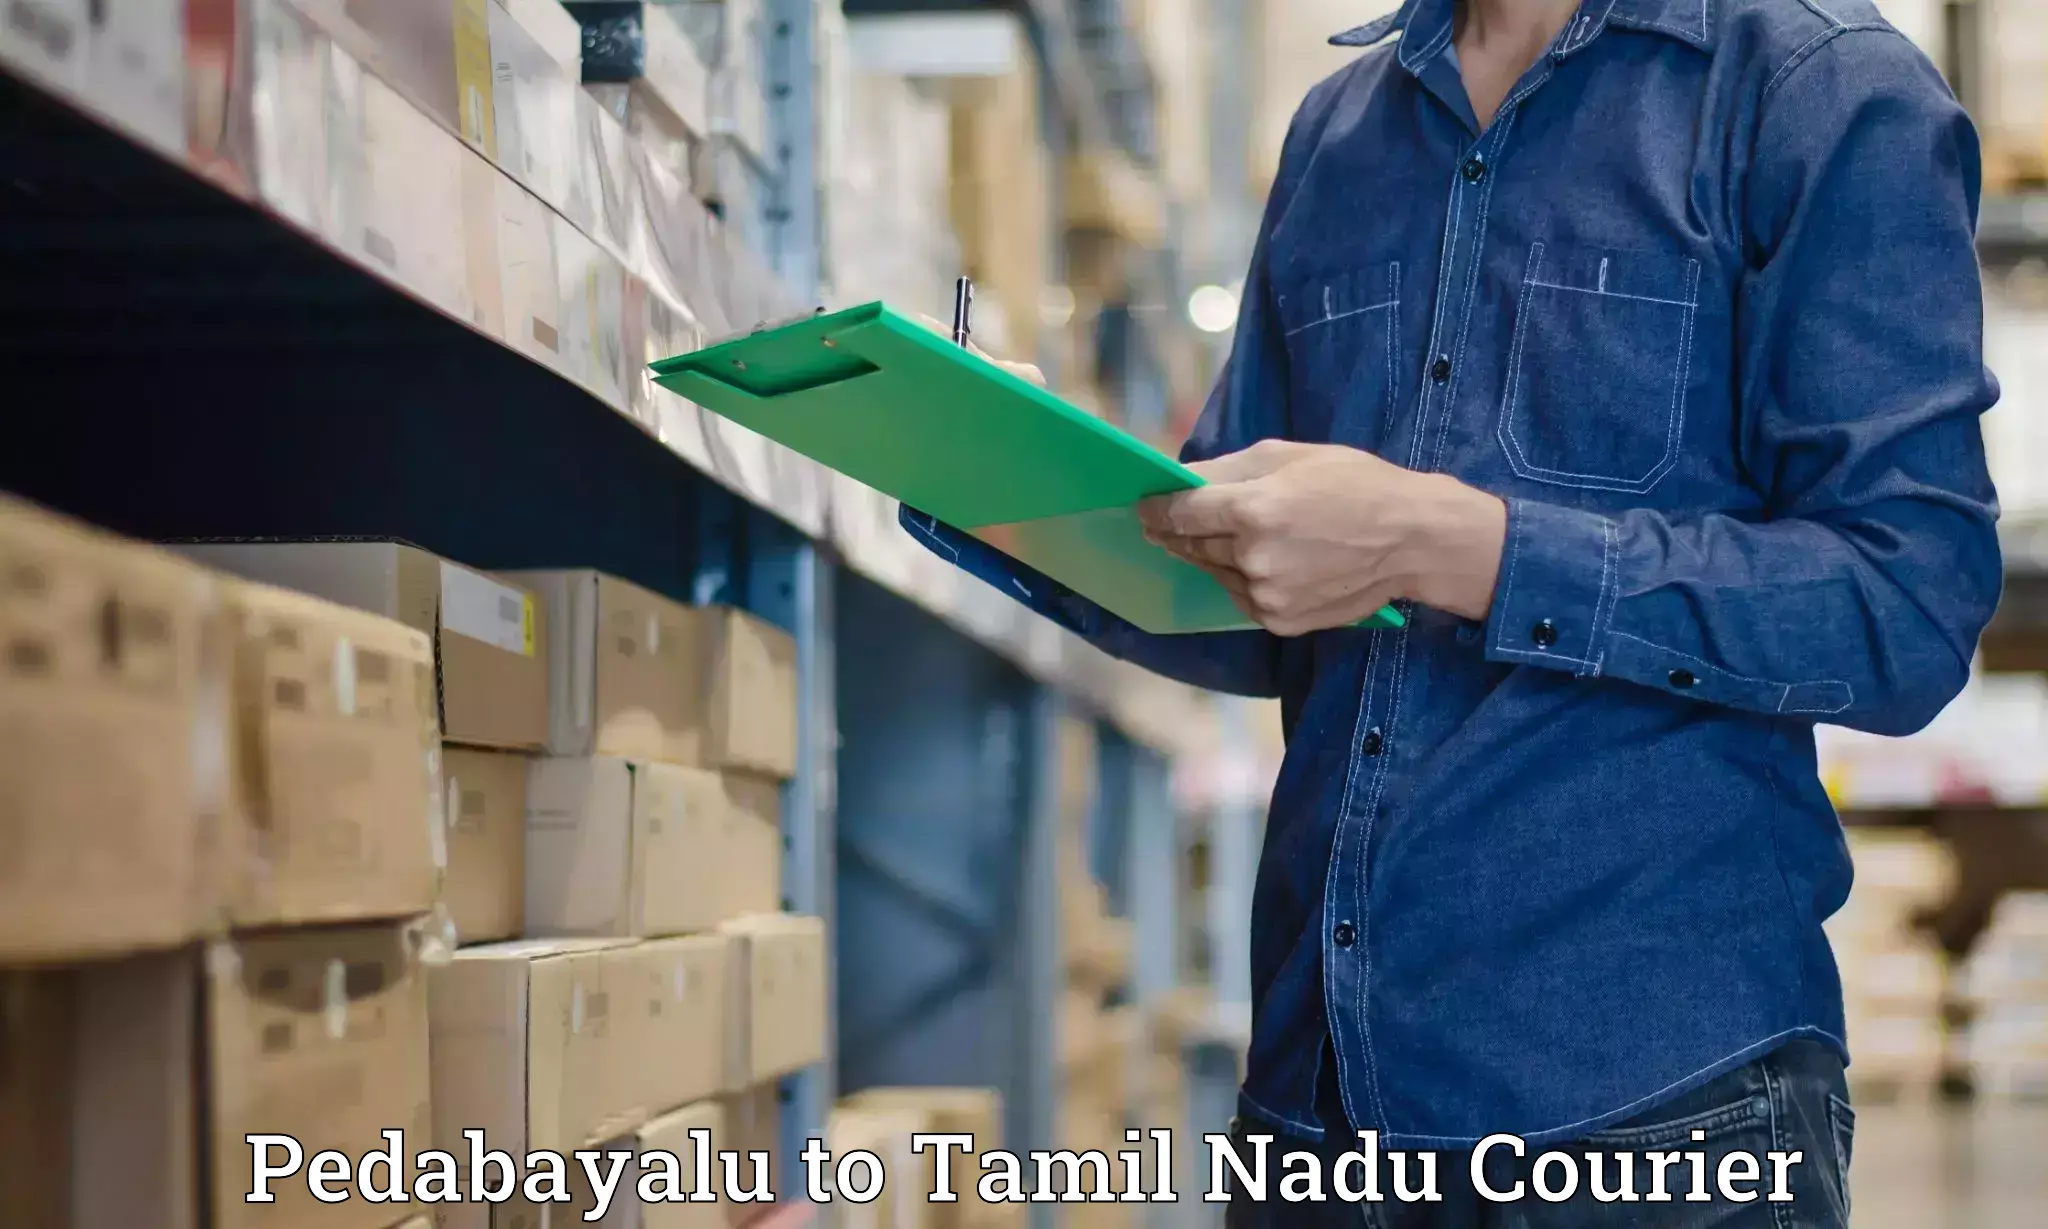 Cross-border shipping Pedabayalu to Meenakshi Academy of Higher Education and Research Chennai